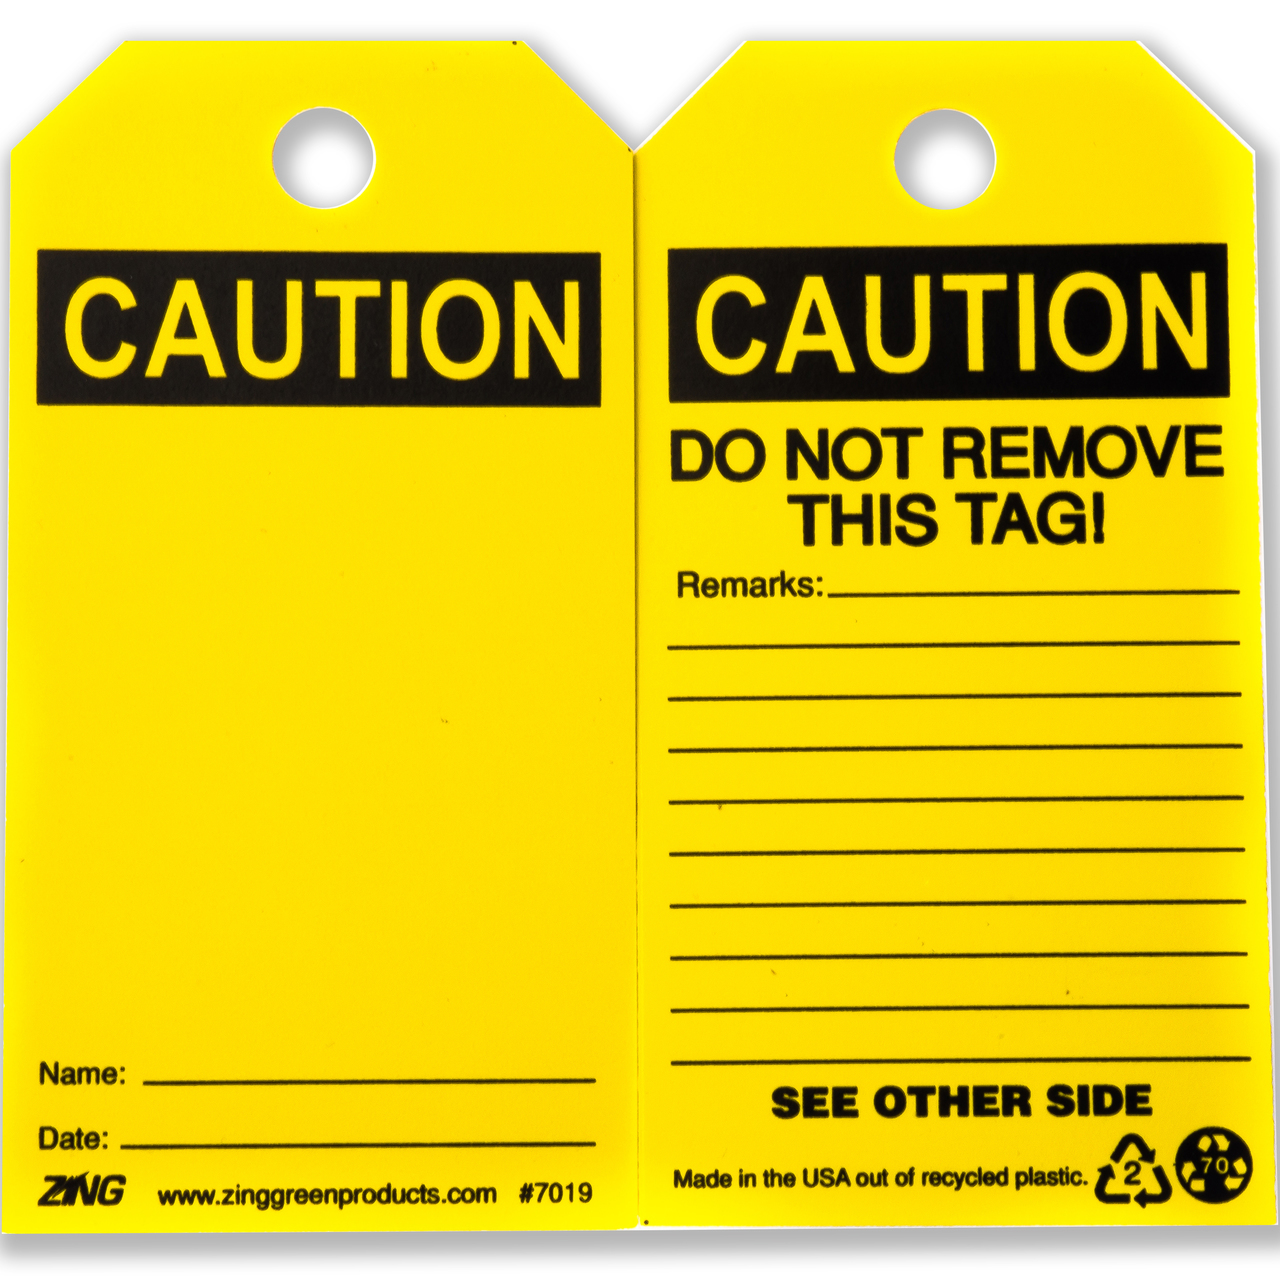 ZING Eco Safety Tag, CAUTION, Blank, 5.75Hx3W, 10 Pack